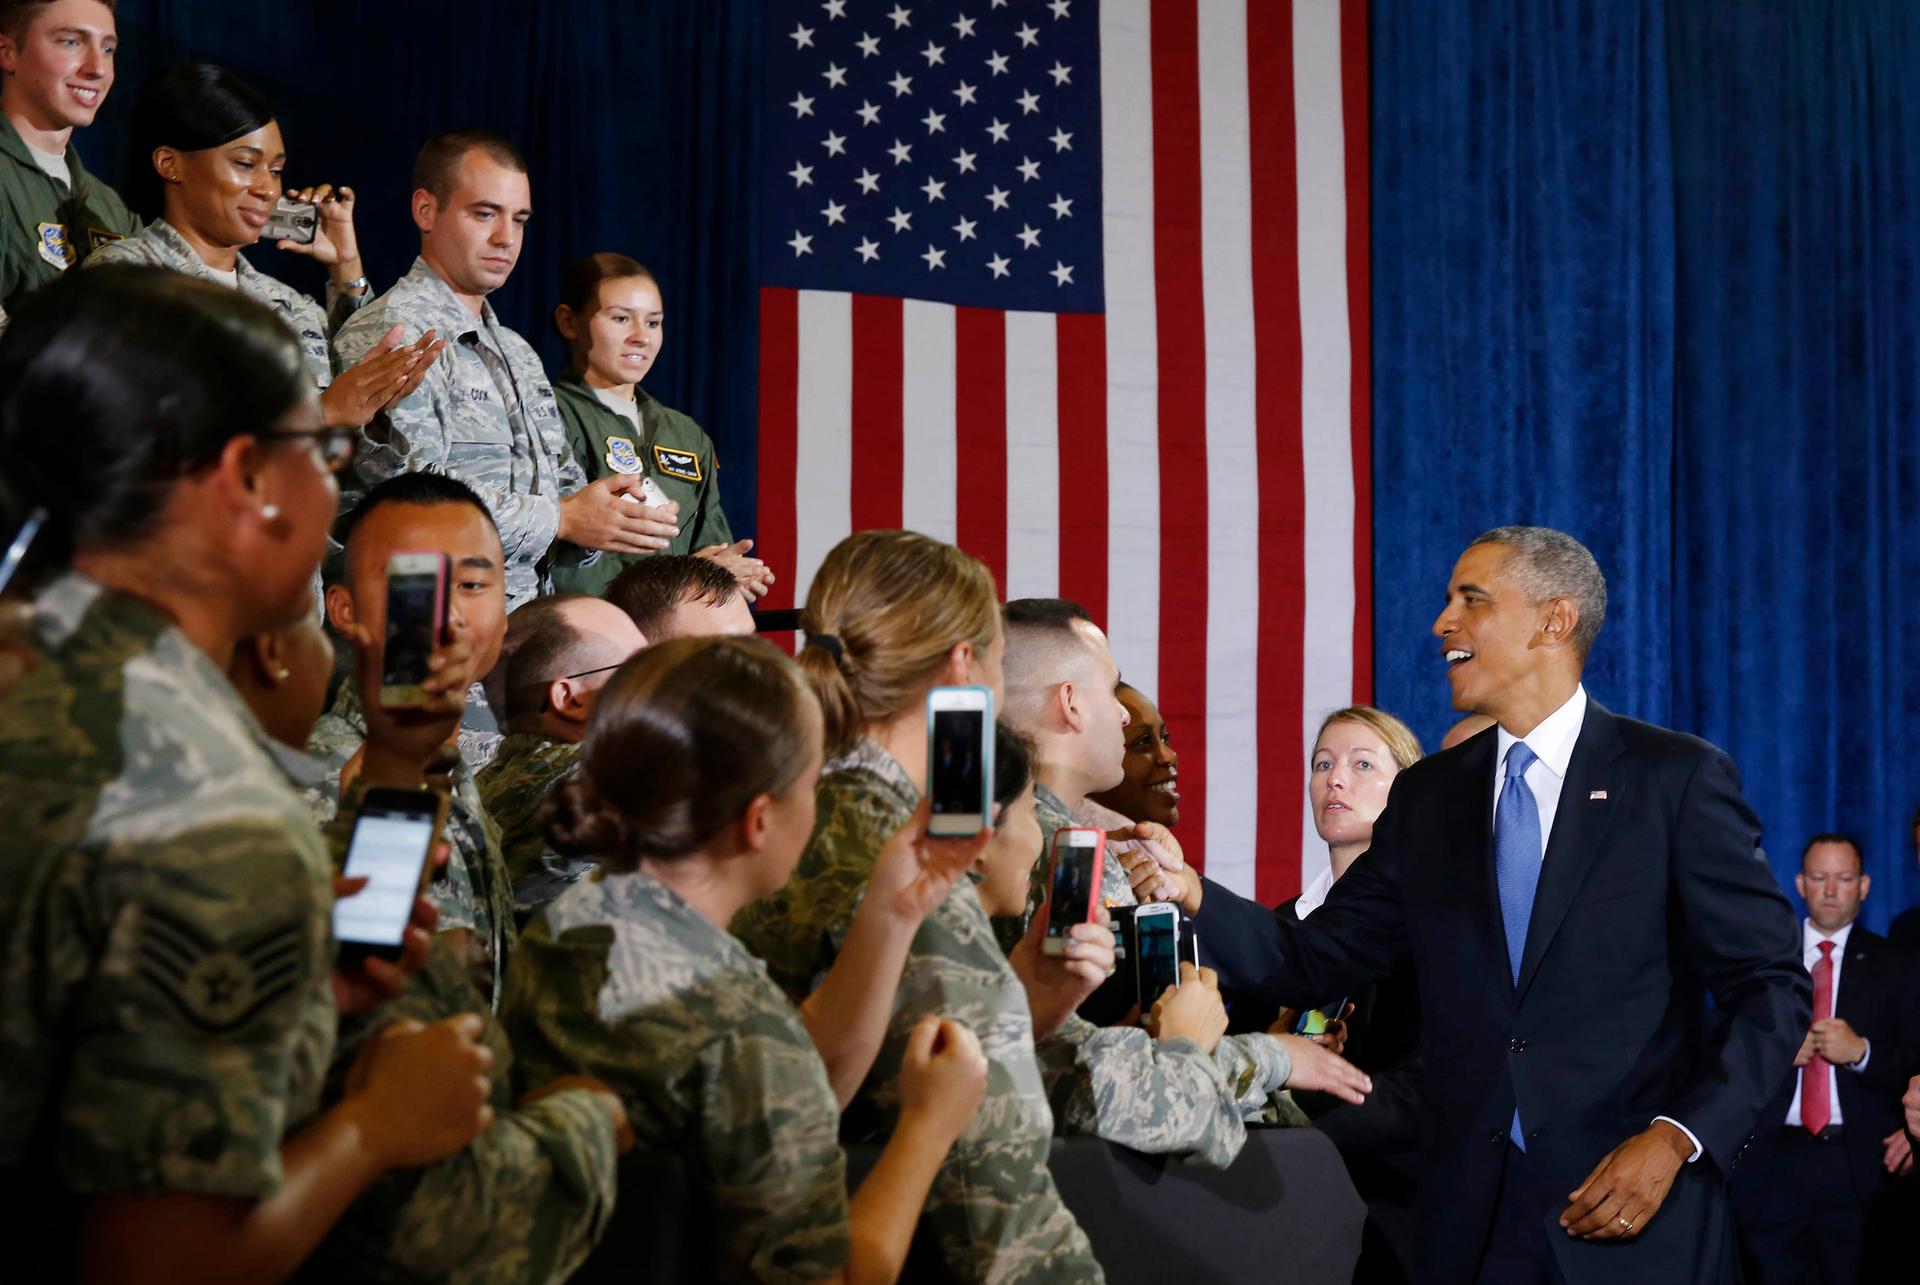 President Barack Obama shakes hands before speaking at MacDill Air Force Base in Tampa, Florida.